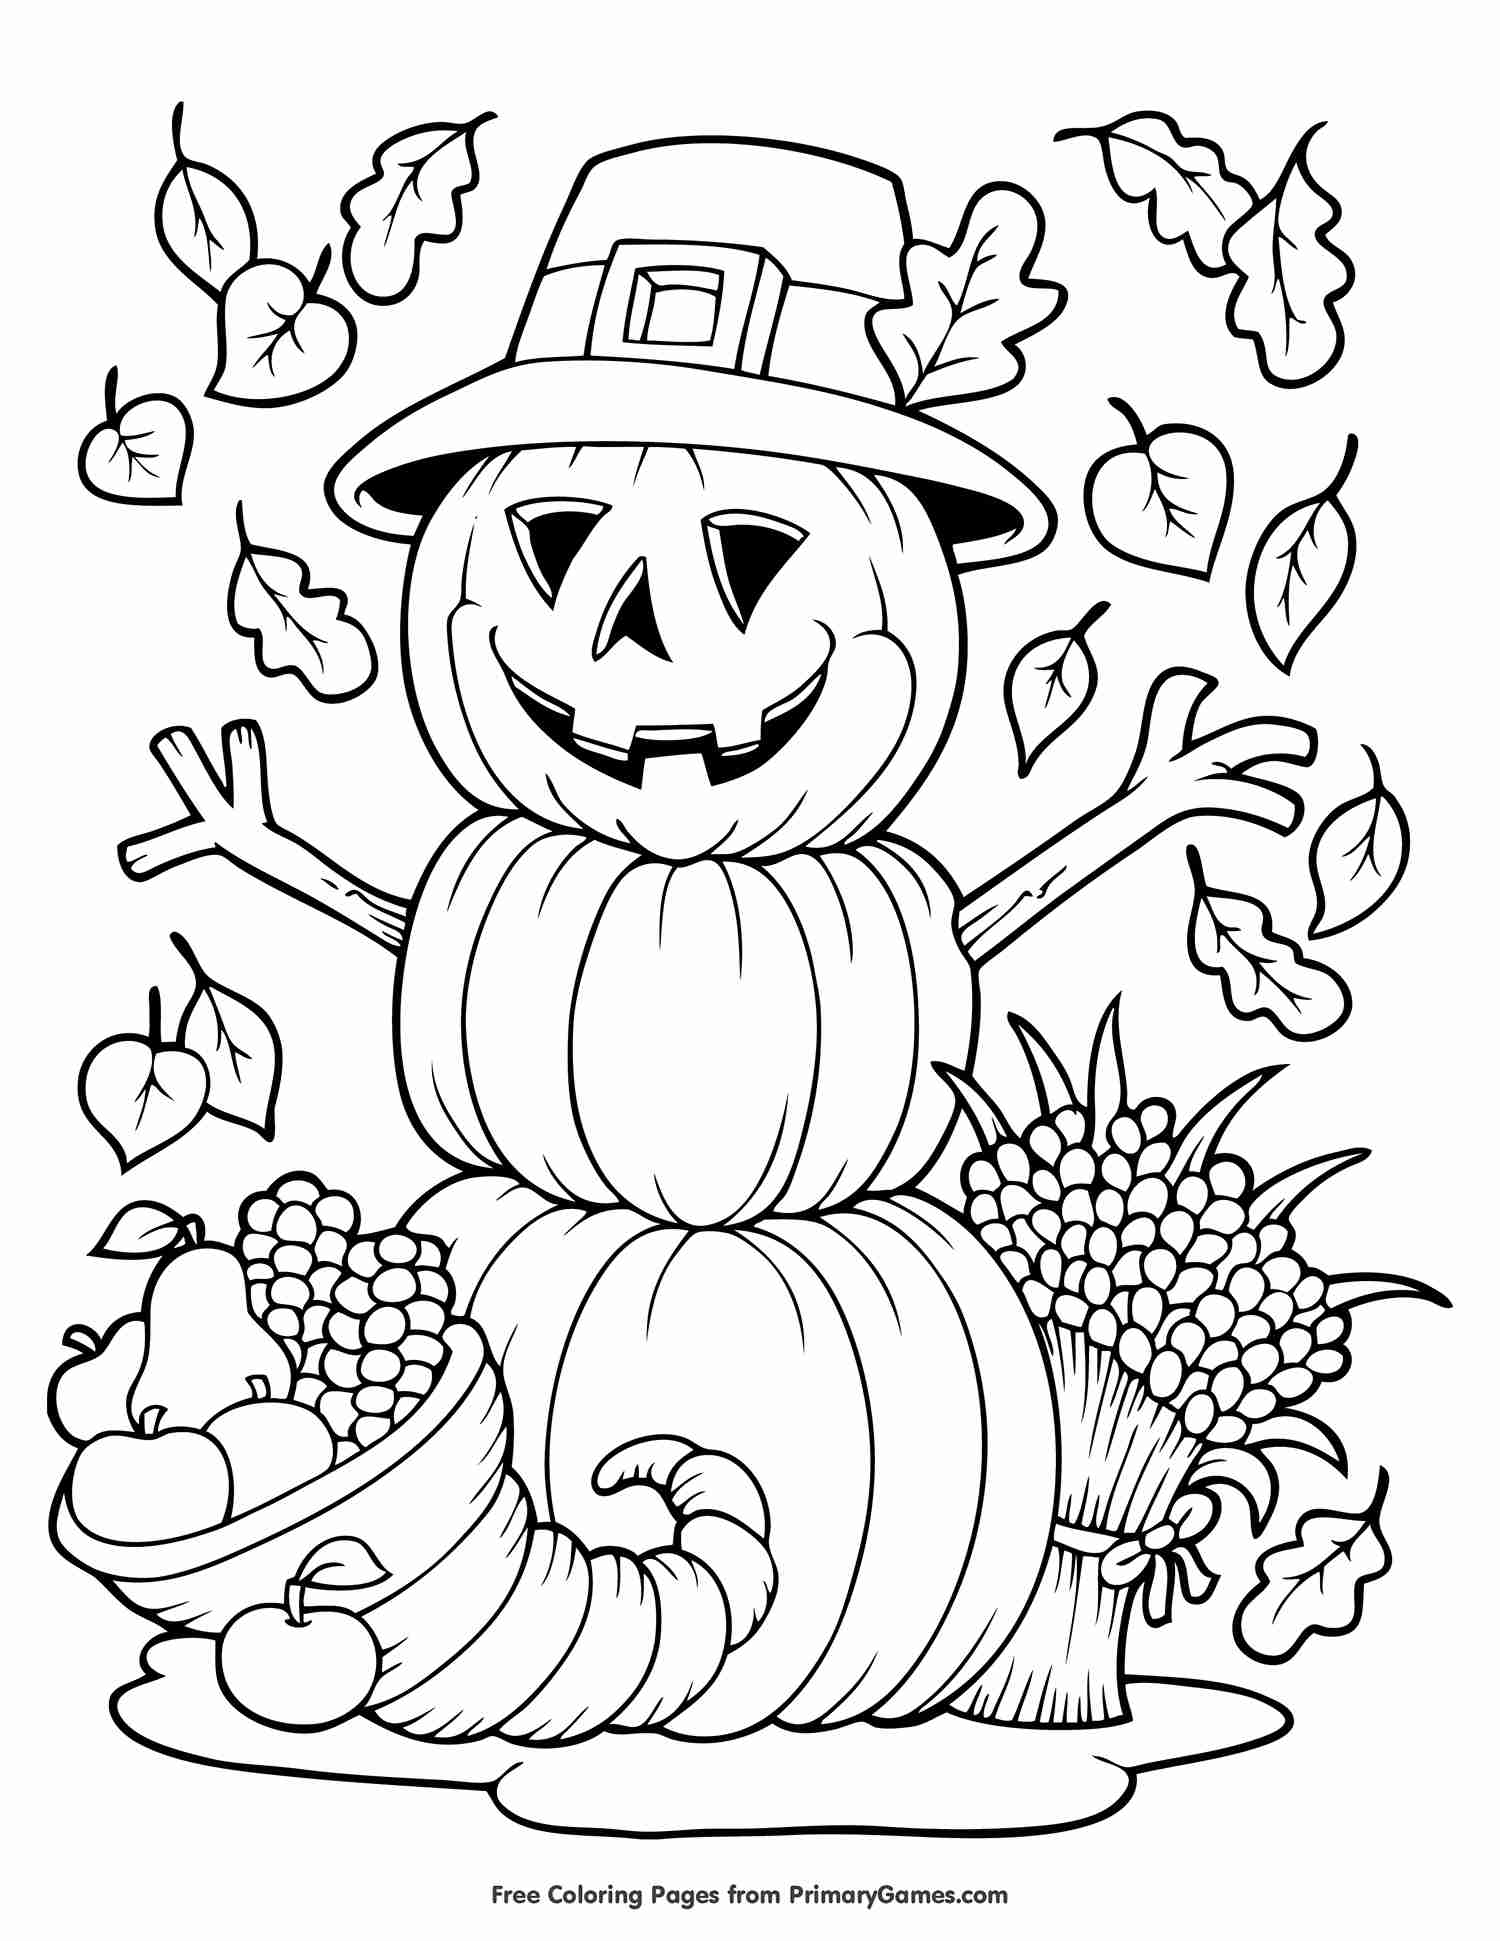 Autumn and Fall Coloring Pages